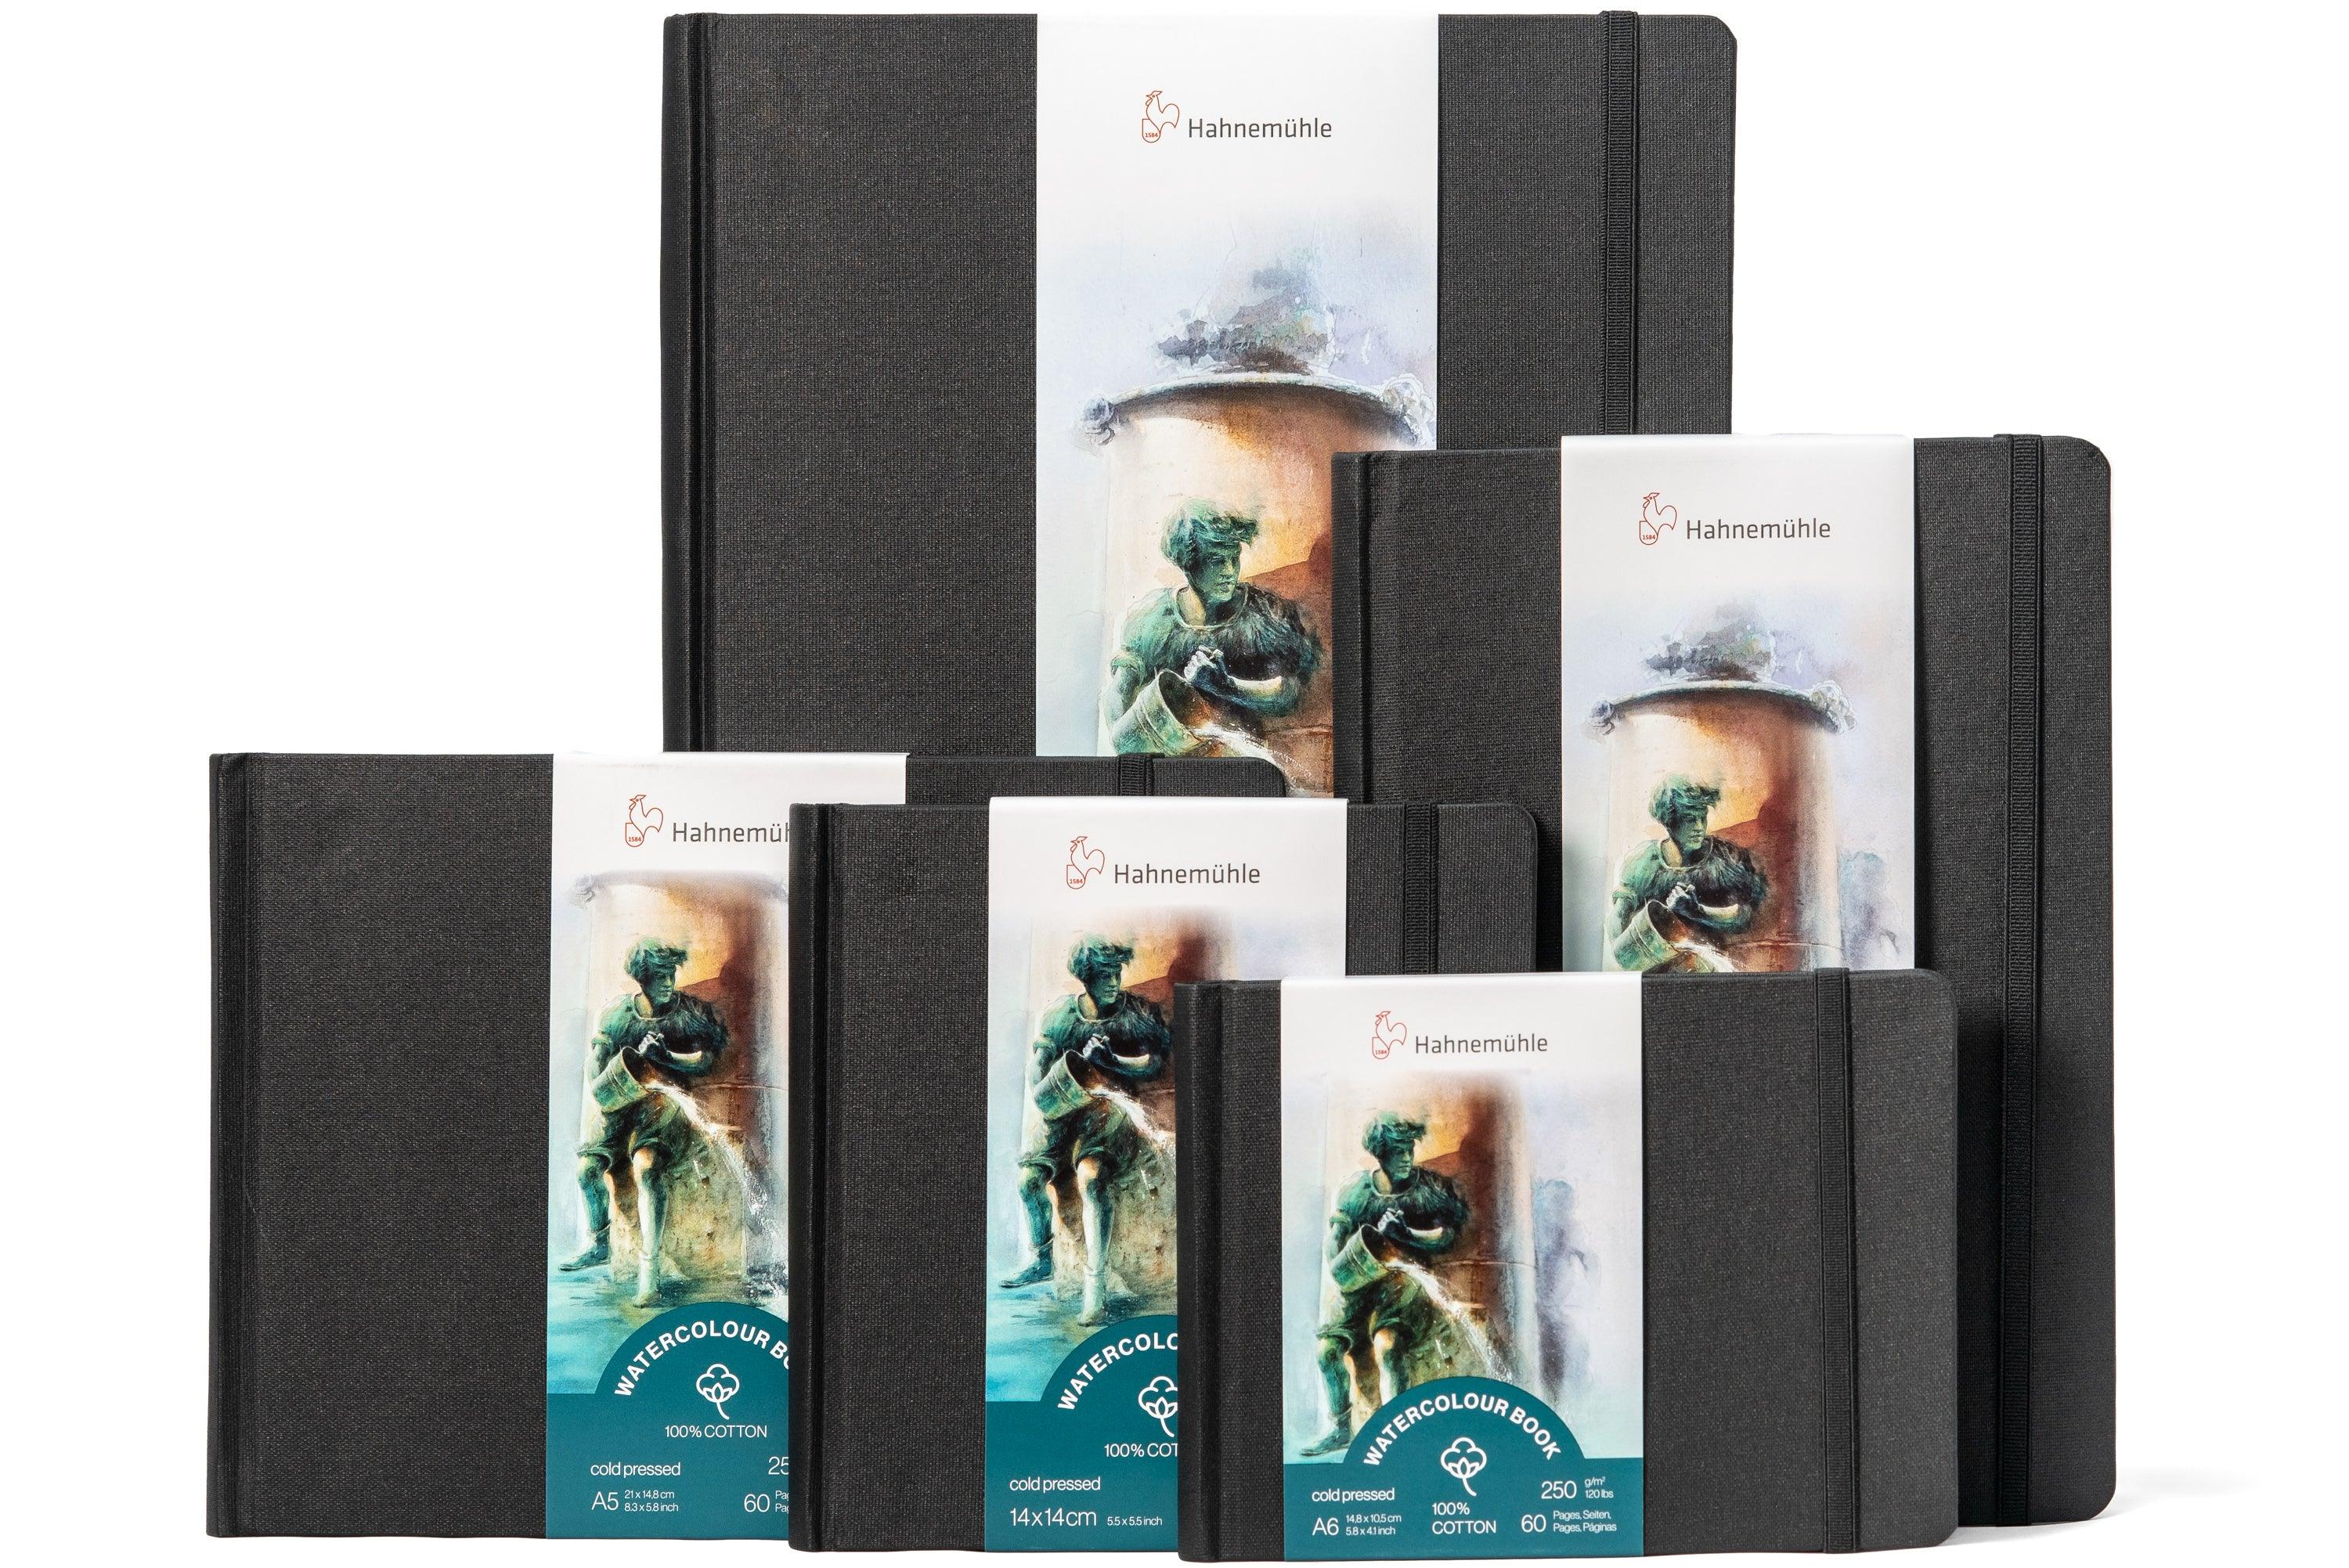 Watercolor Sketchbook With Hard Covers. 100% Cotton, HOT PRESSED